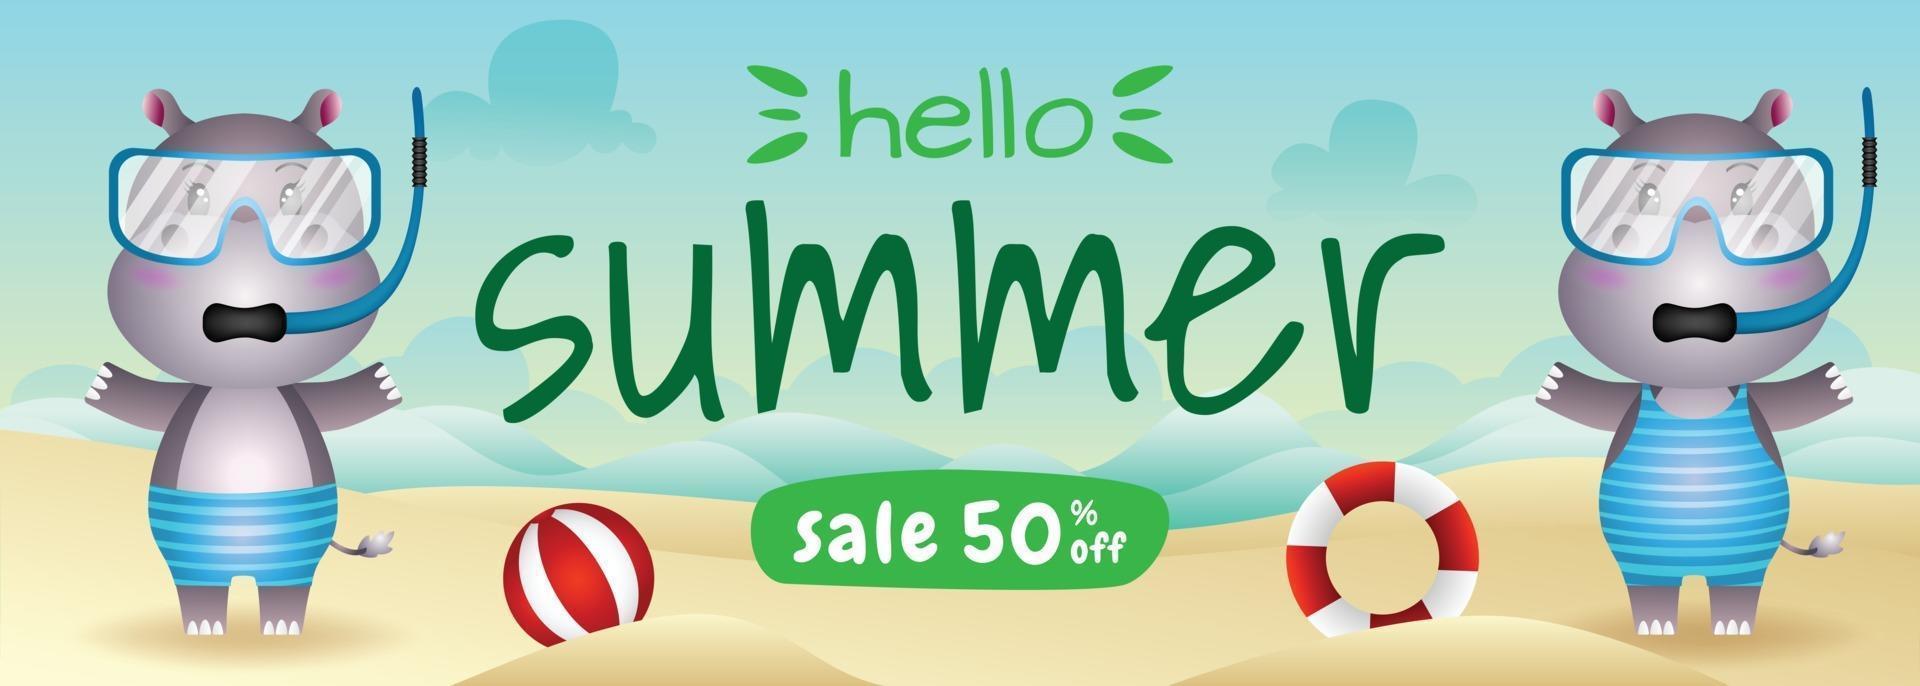 summer sale banner with a cute hippo couple using snorkeling costume in beach vector